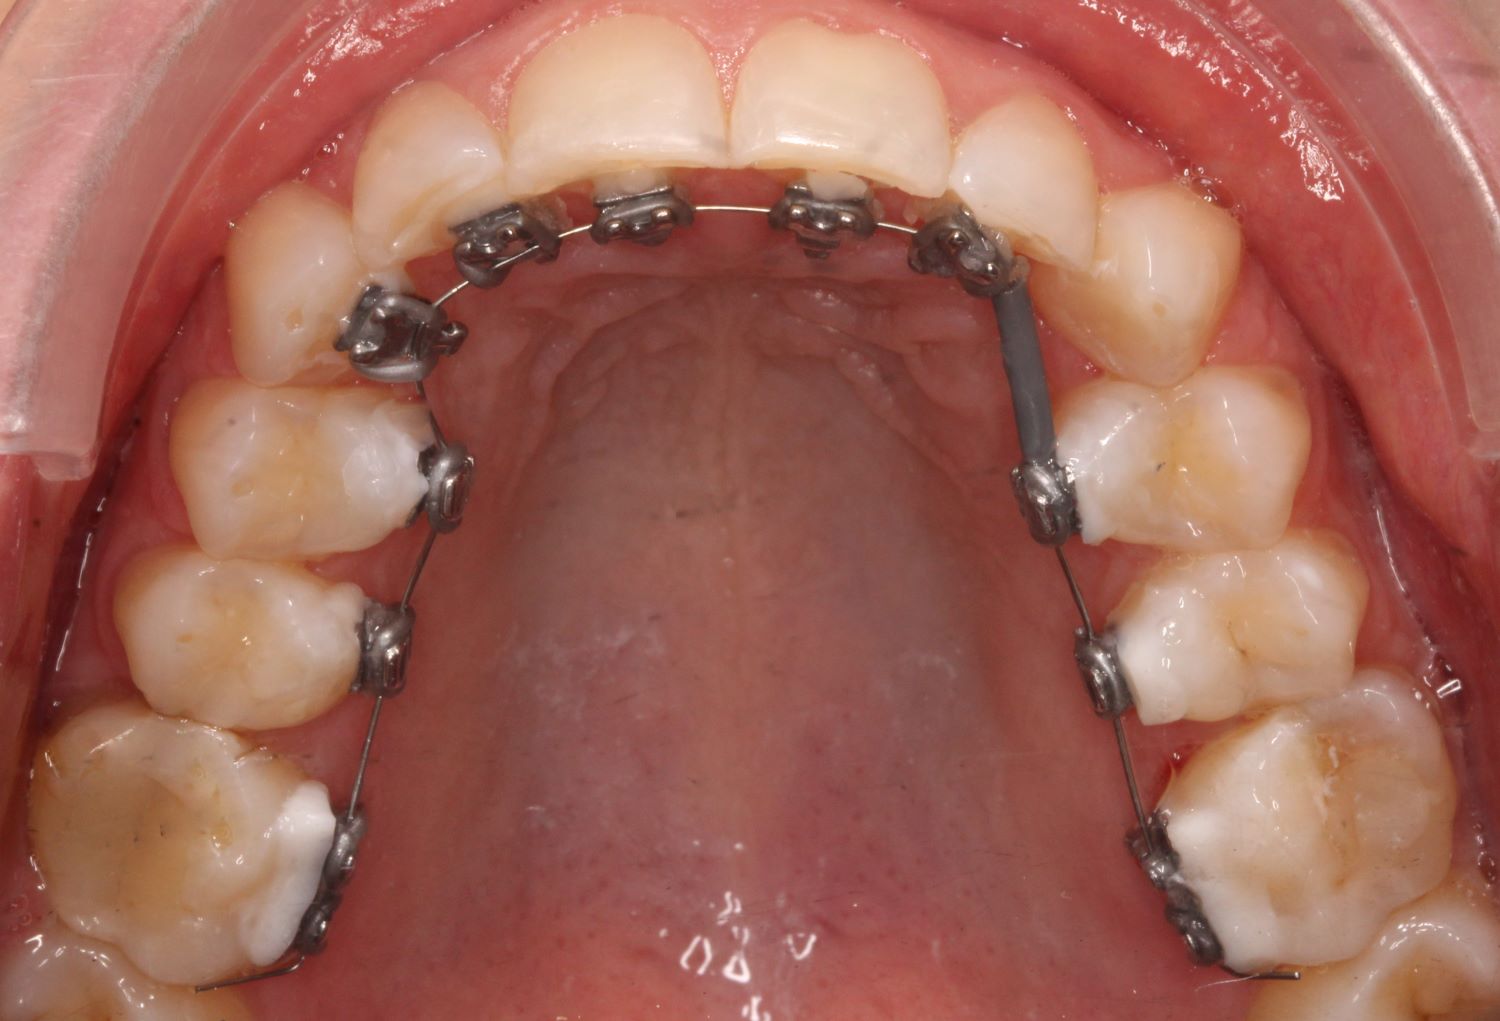 Customised lingual orthodontic brackets with archwire